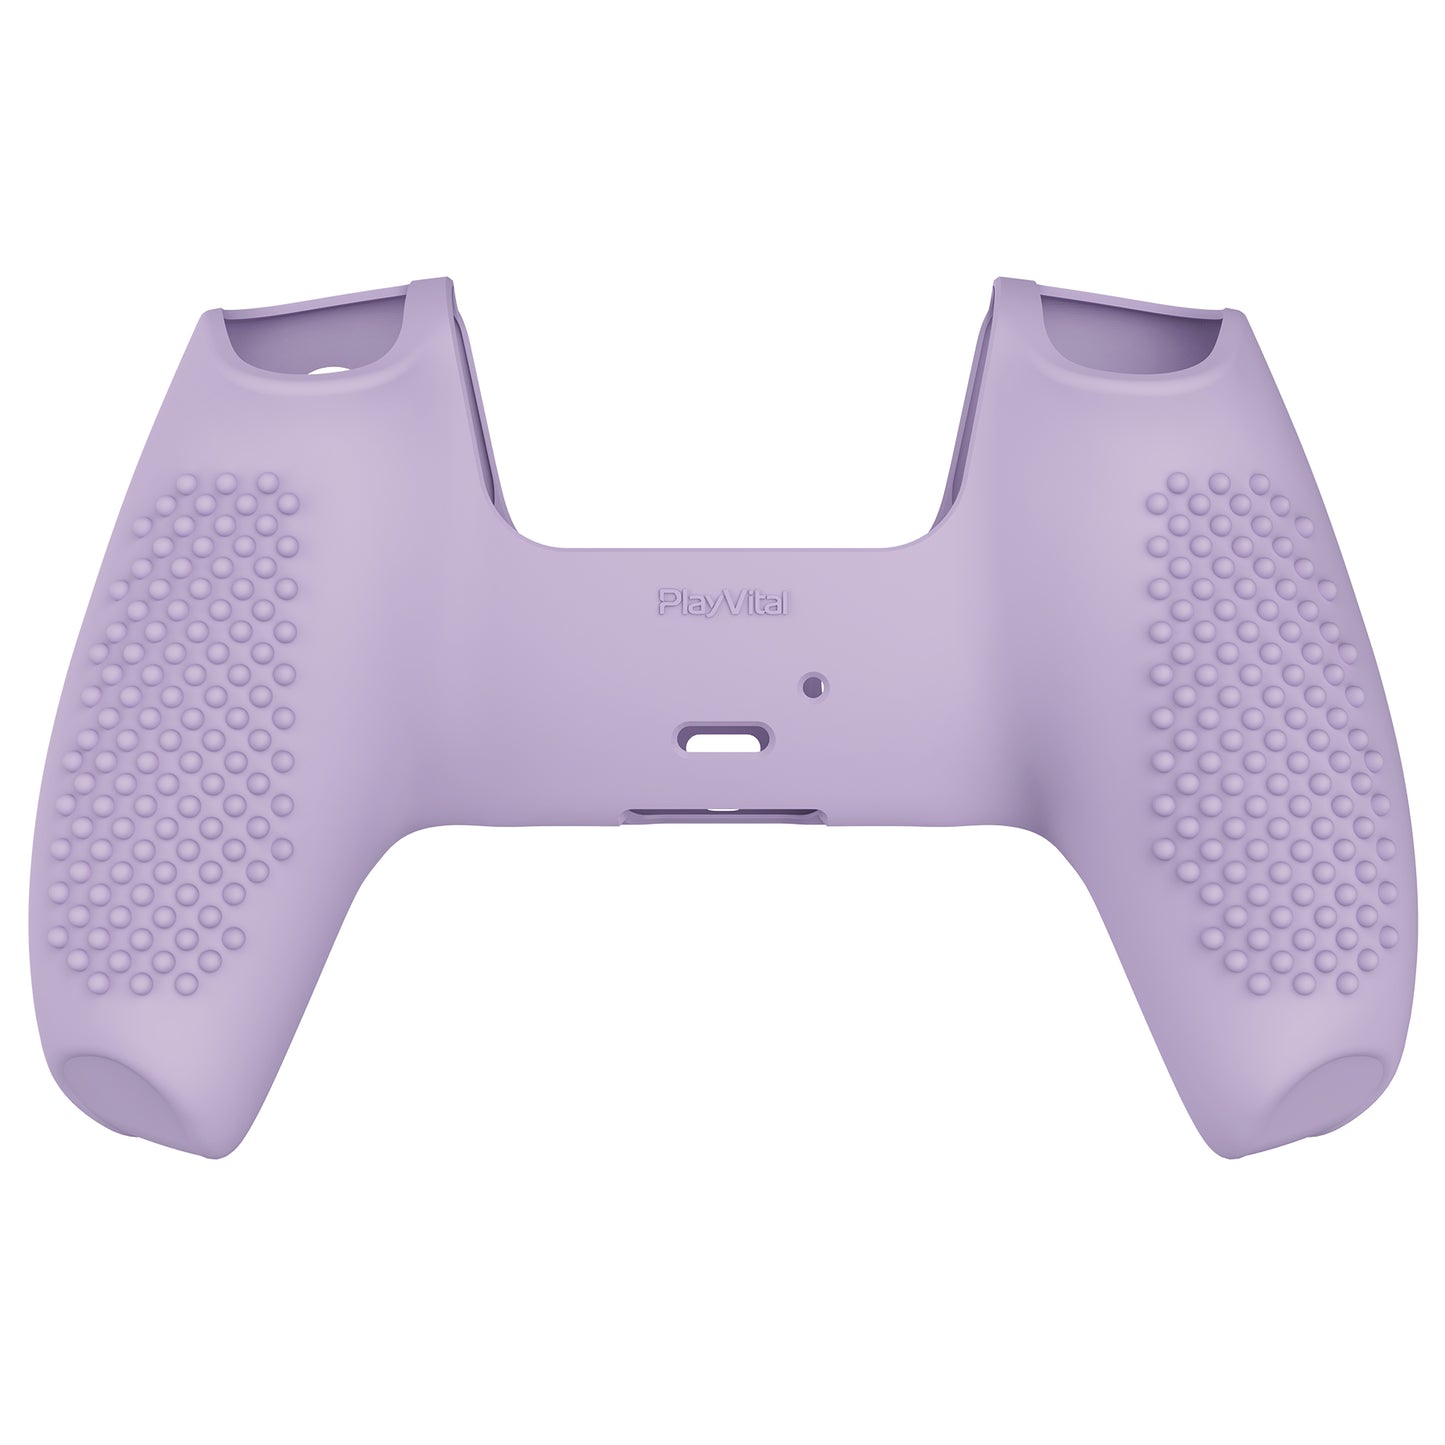 PlayVital 3D Studded Edition Anti-Slip Silicone Cover Skin with Thumb Grip Caps for PS5 Wireless Controller - Mauve Purple - TDPF009 PlayVital